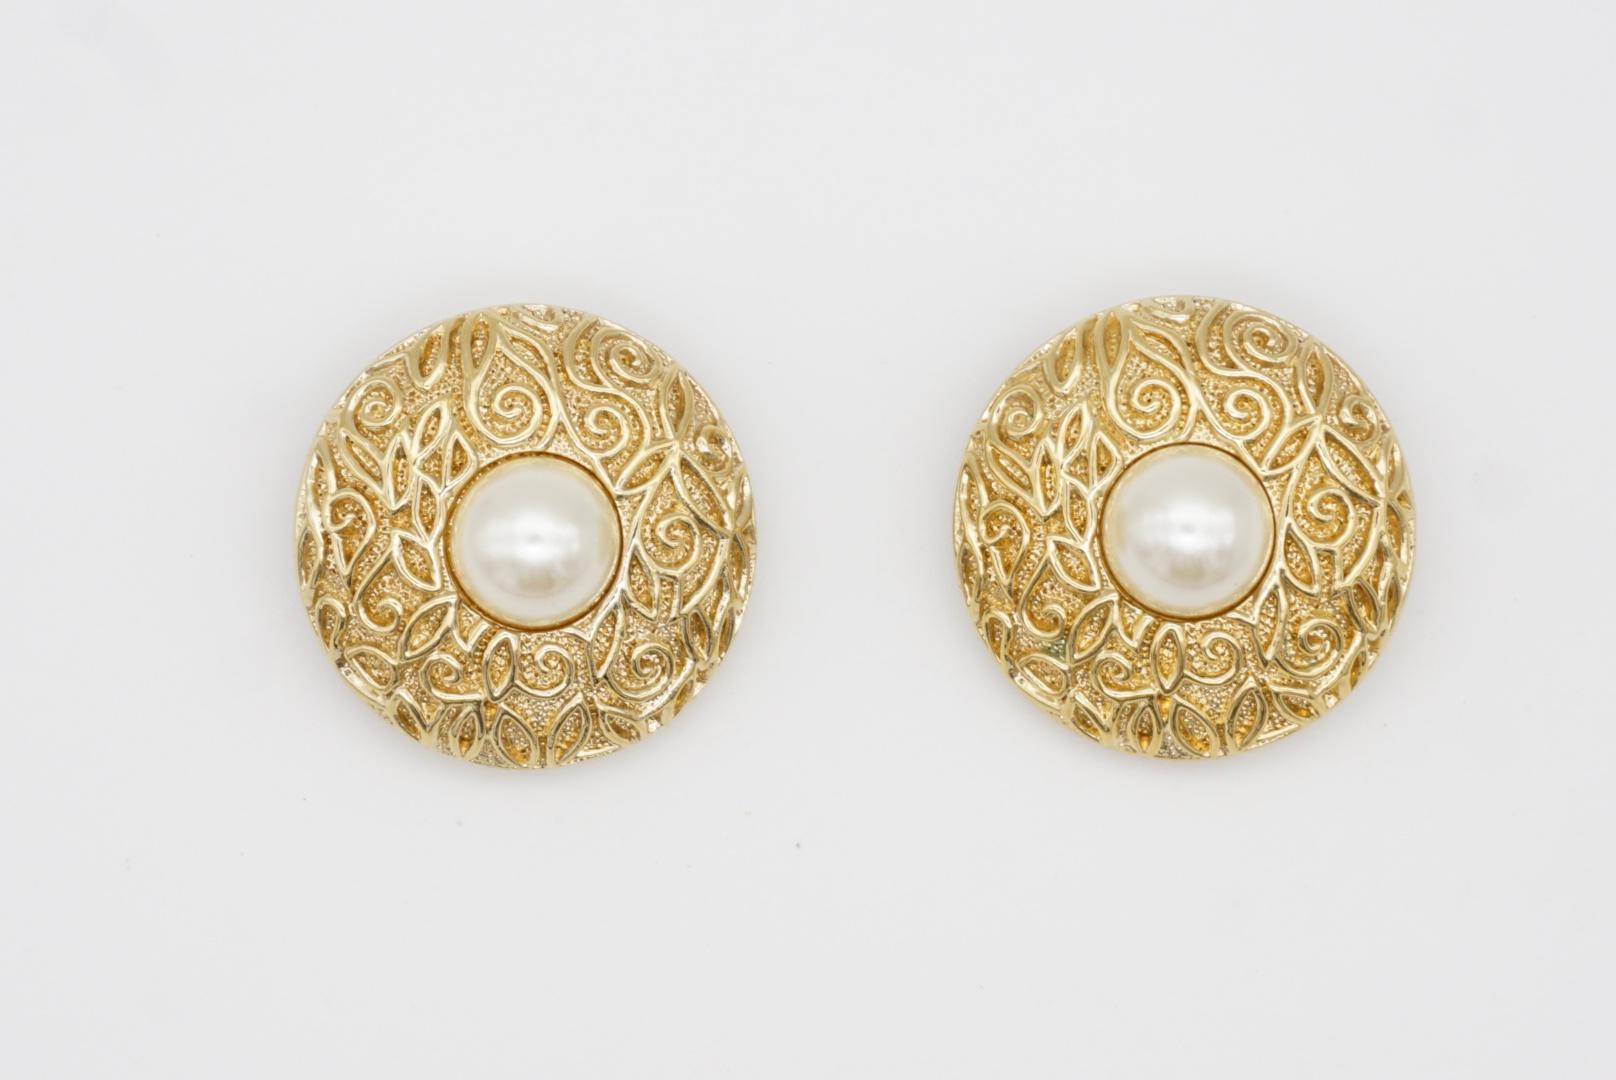 Christian Dior Vintage 1980 Large Round Relief Flower White Pearl Clip Earrings For Sale 1